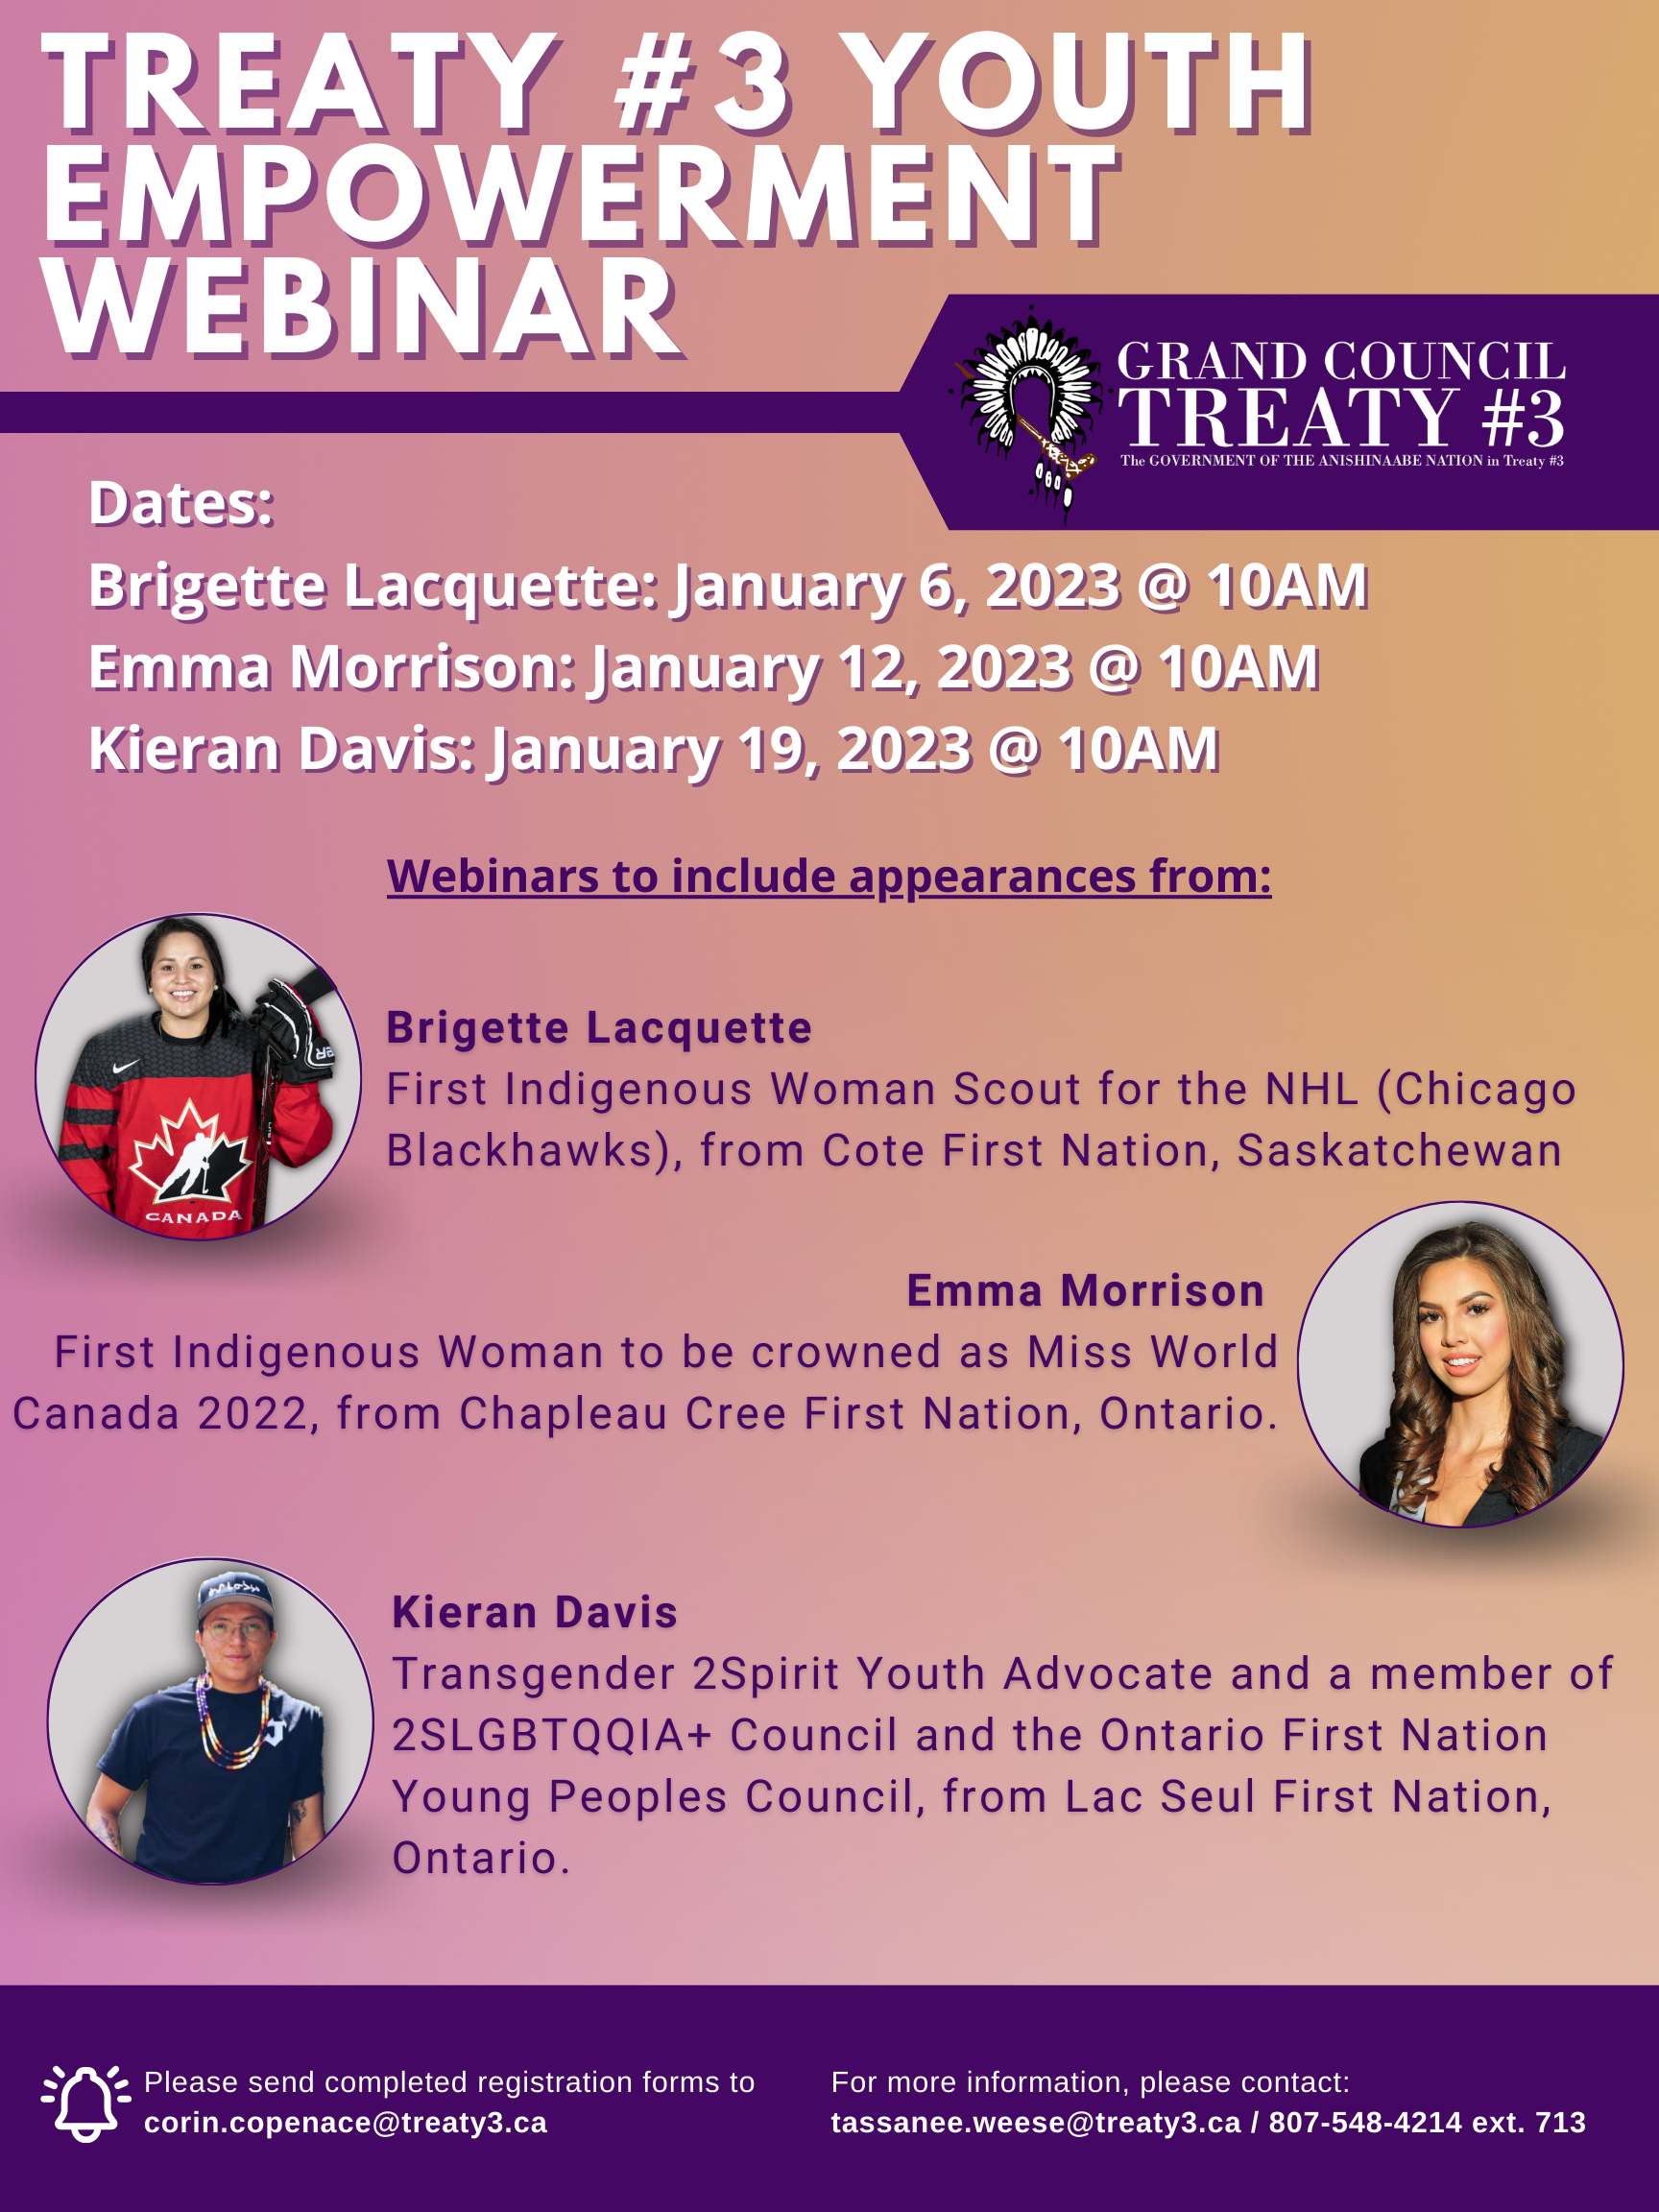 Treaty #3 Youth Empowerment Webinar with Brigette Lacquette